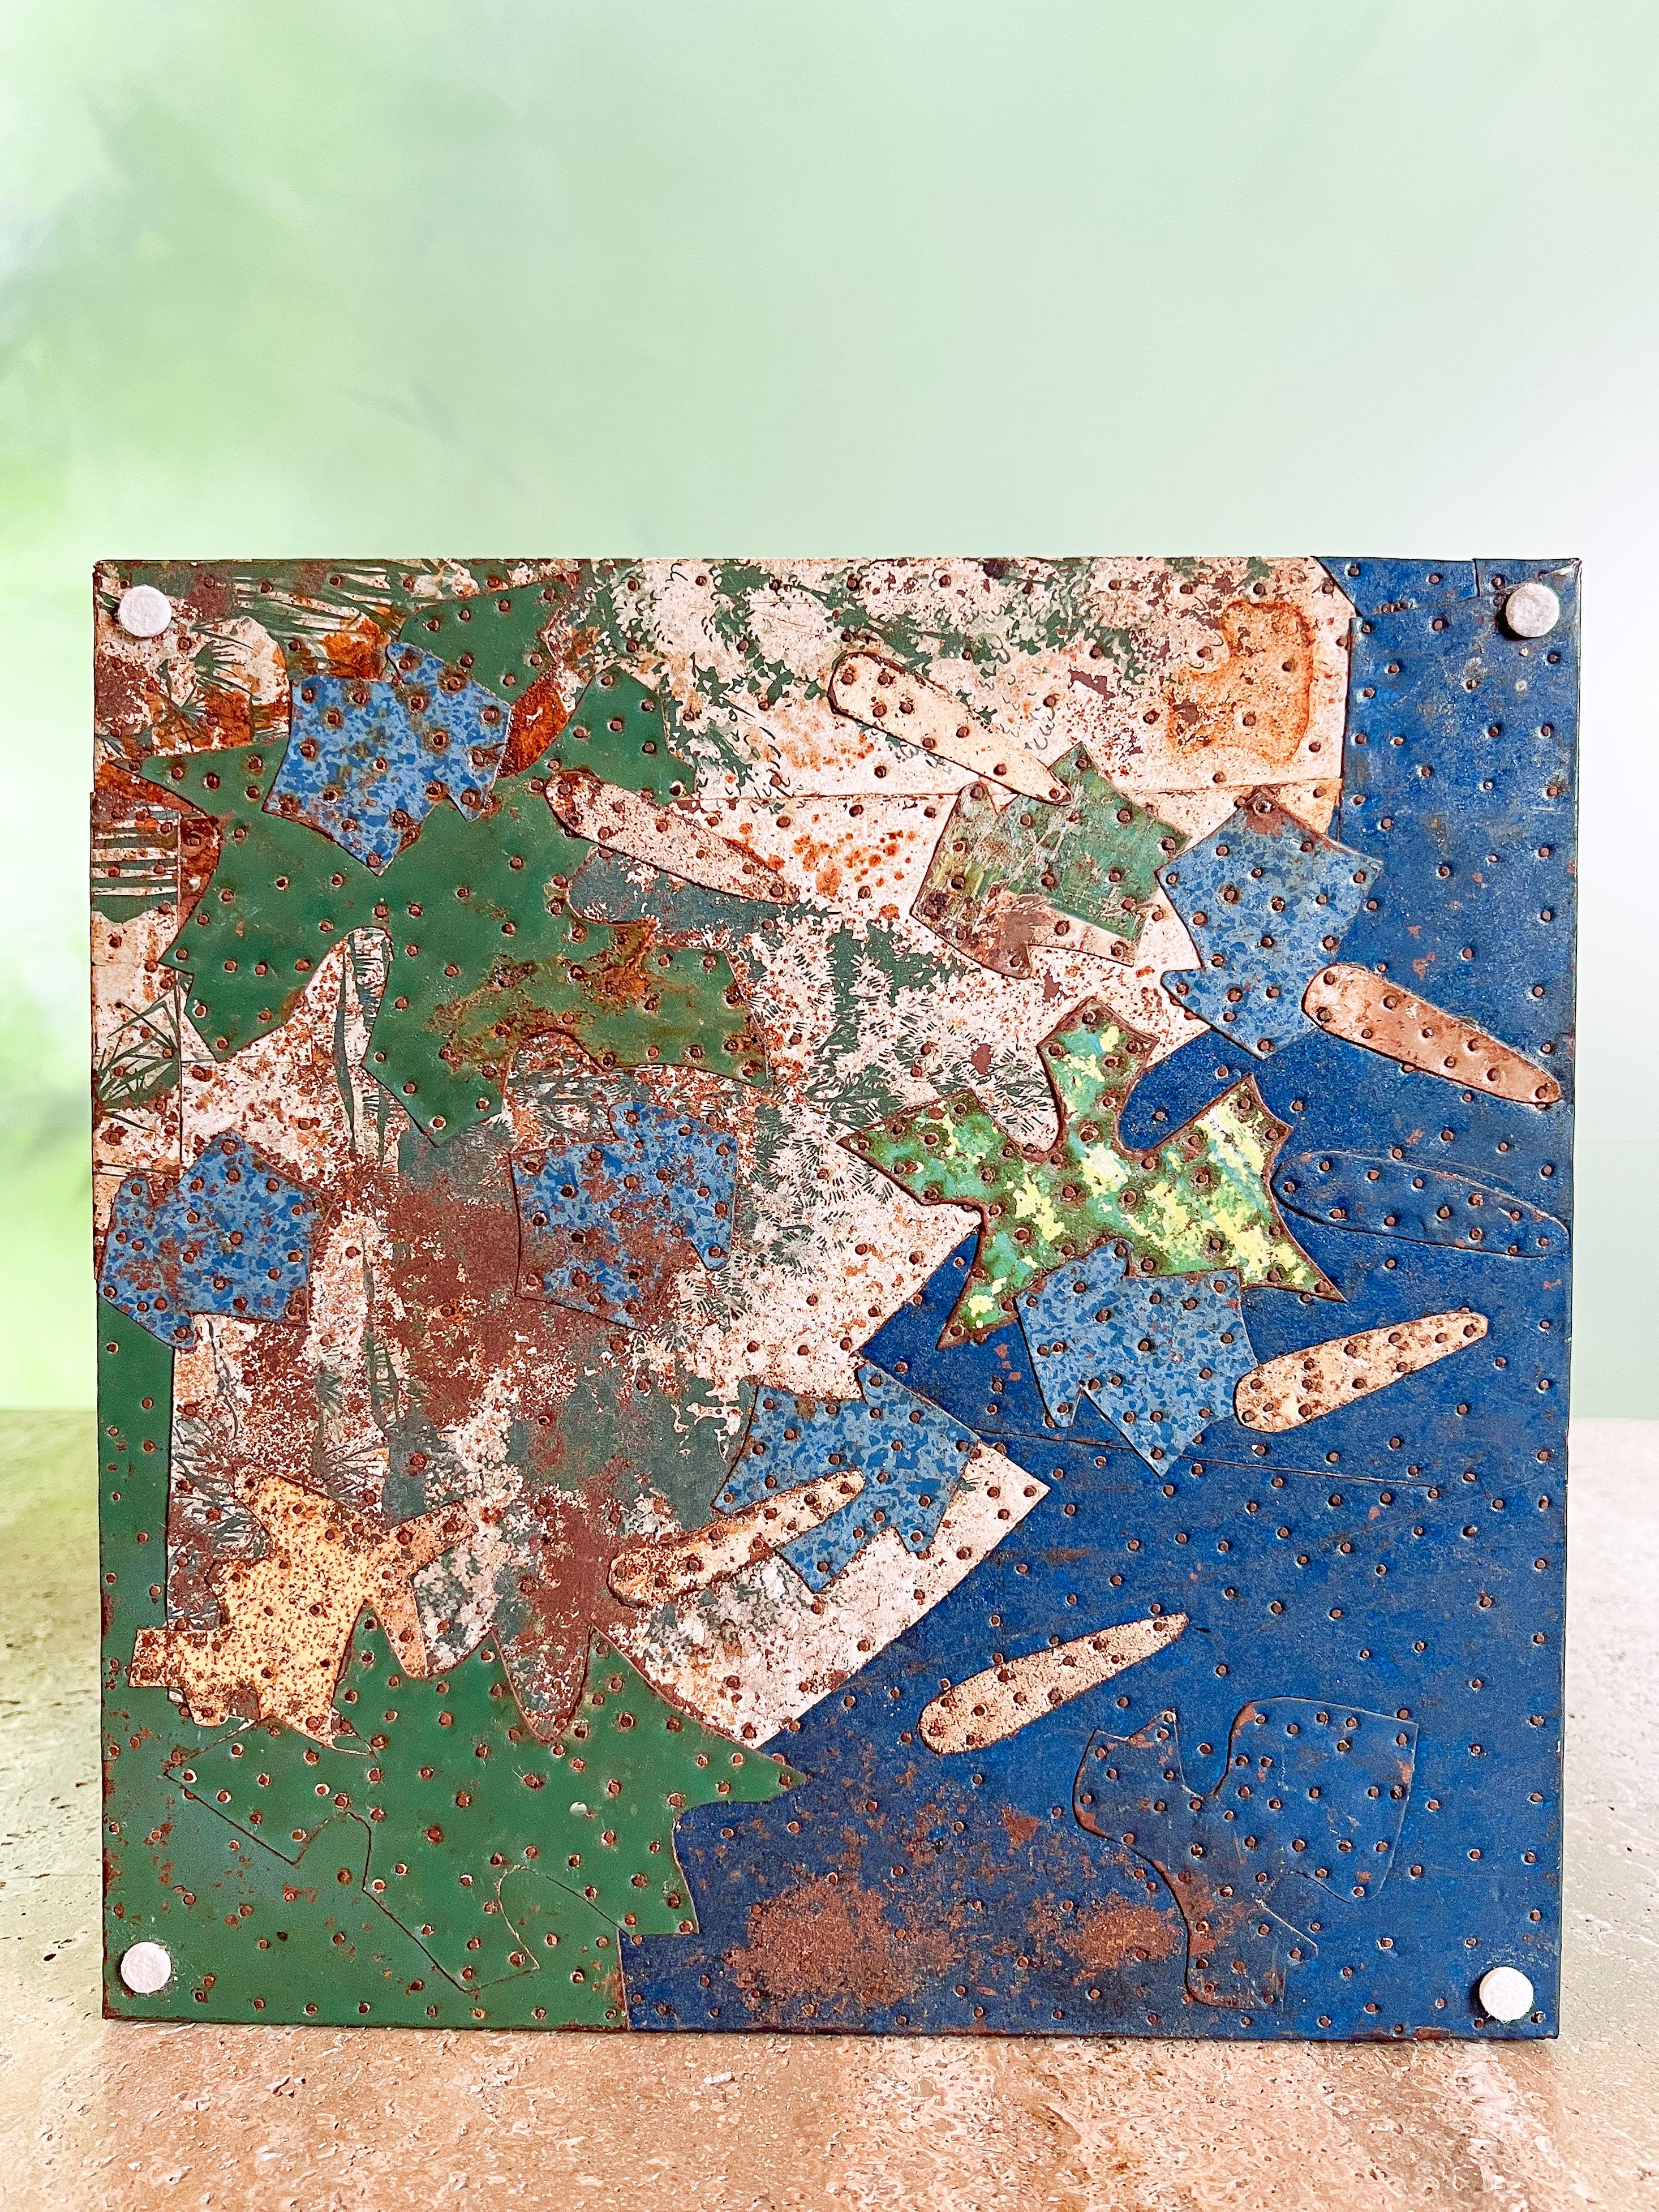 Enamel Cube Collage 'The Forest' by Tony Berlant For Sale